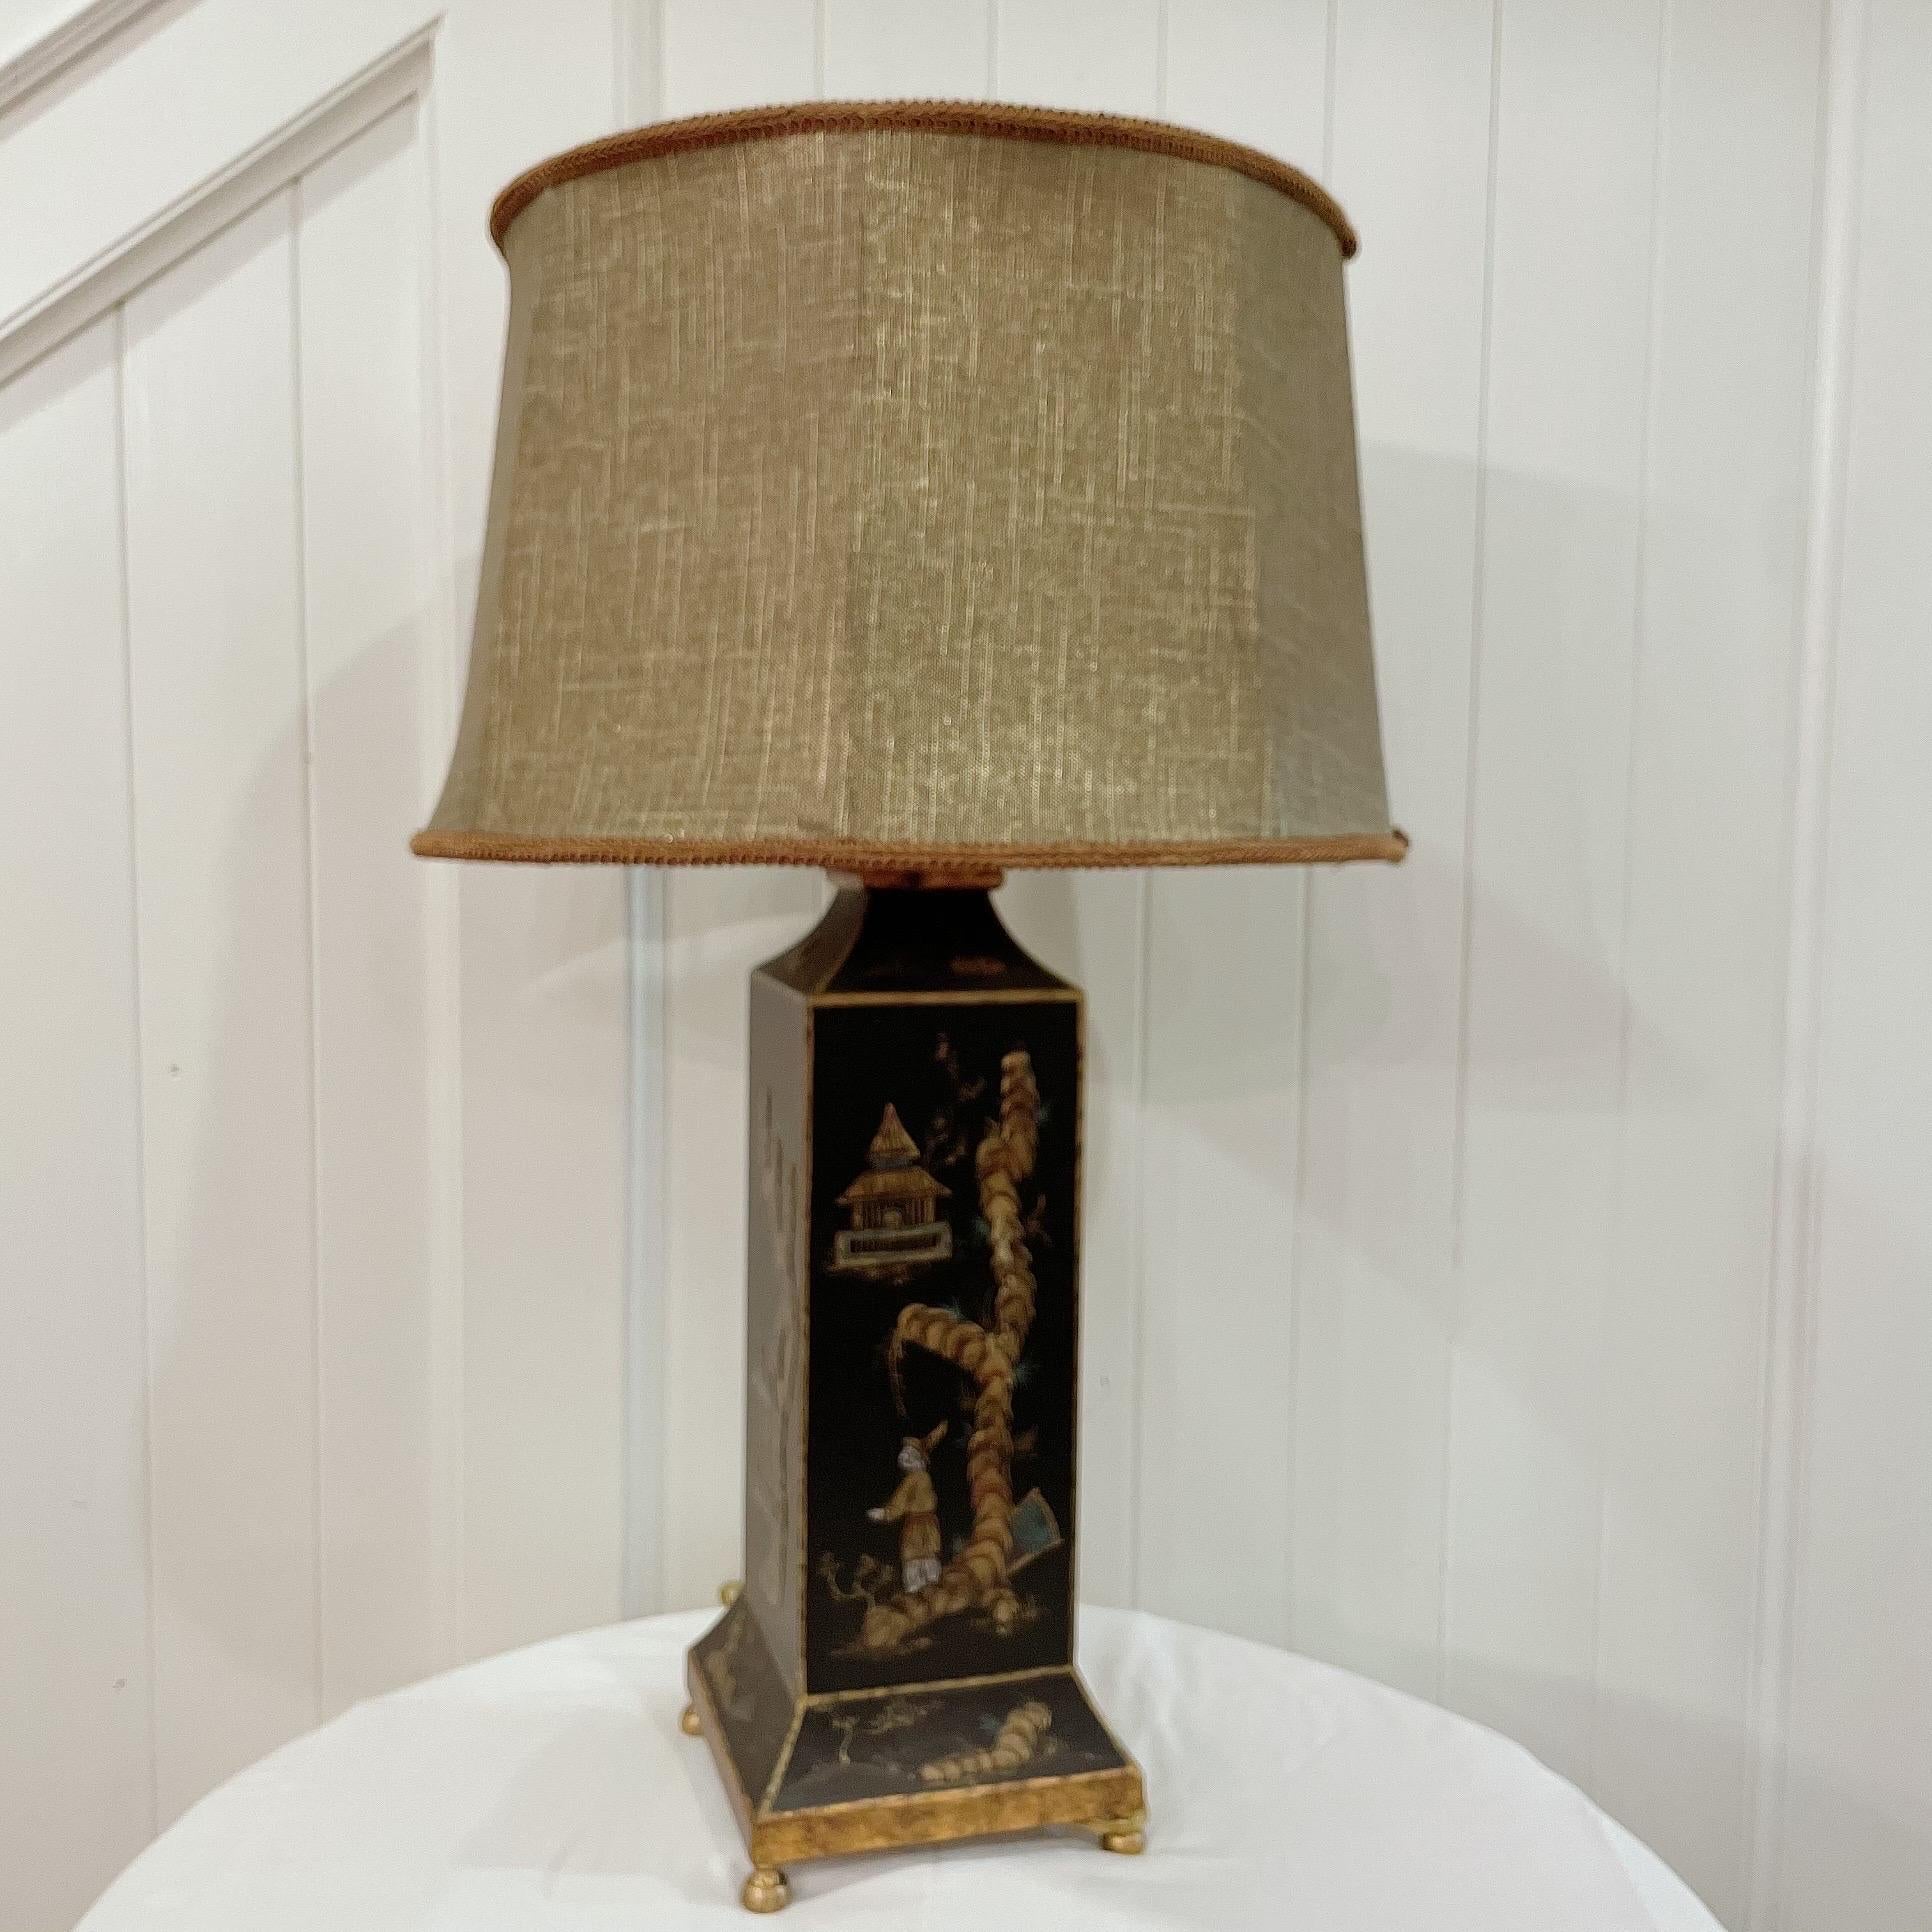 Vintage chinoiserie tole black lacquered lamp with a hand-decorated gilt design featuring pagodas, men, and flowers. A different scene on each side.